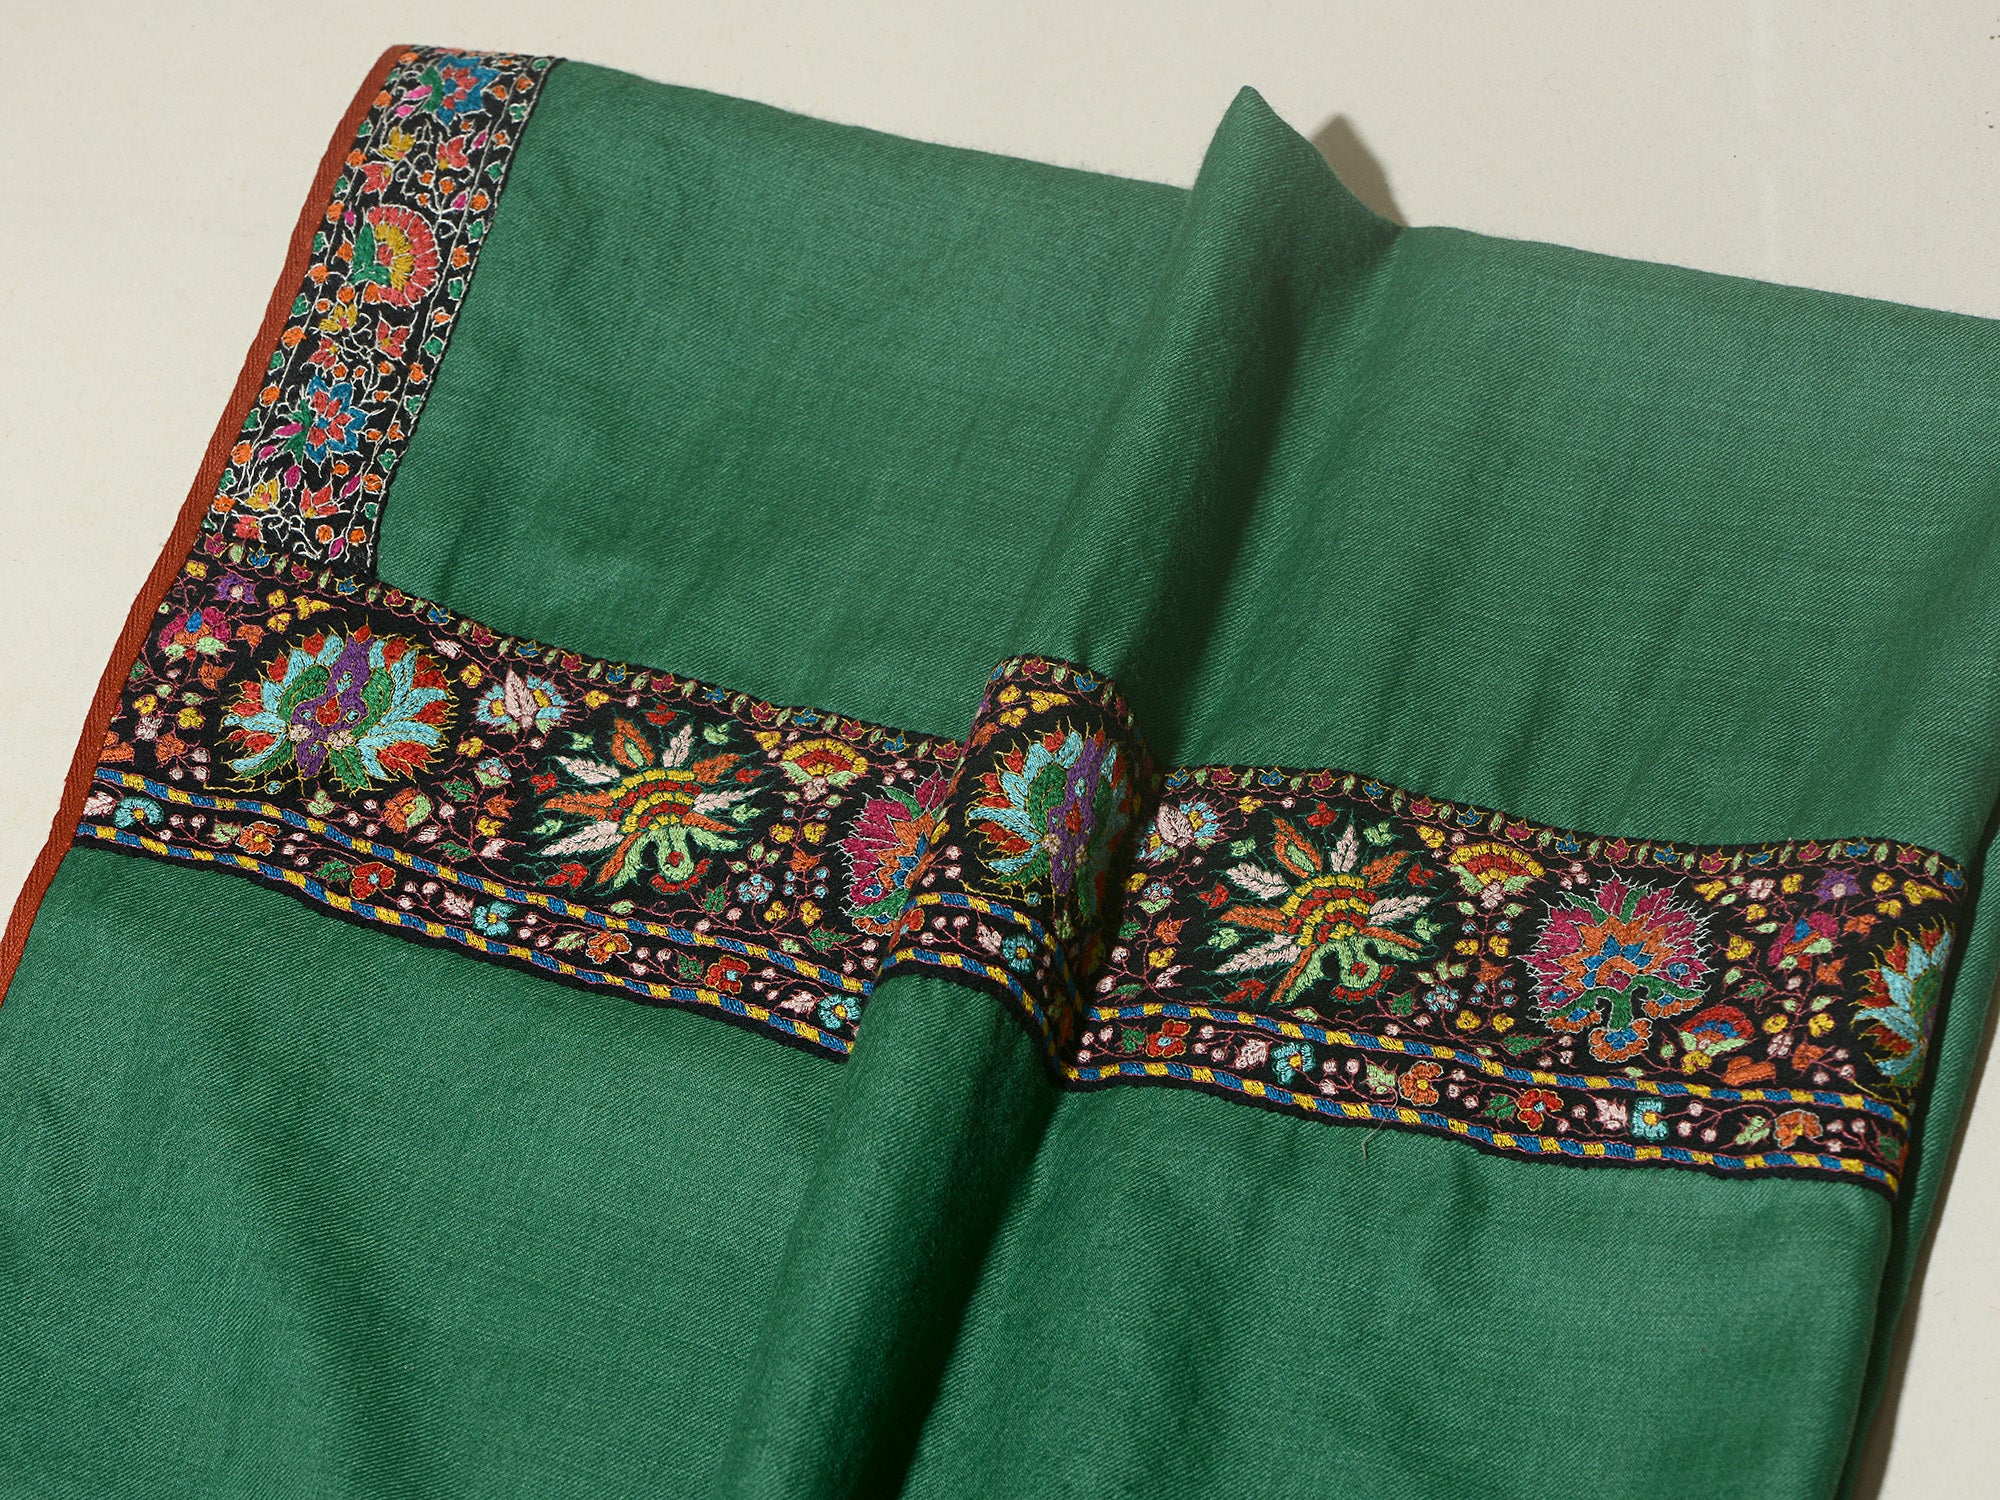 MENDHIKAA  Ethereal Green Vintage Embroidered Shawl - Unisex Limited Edition